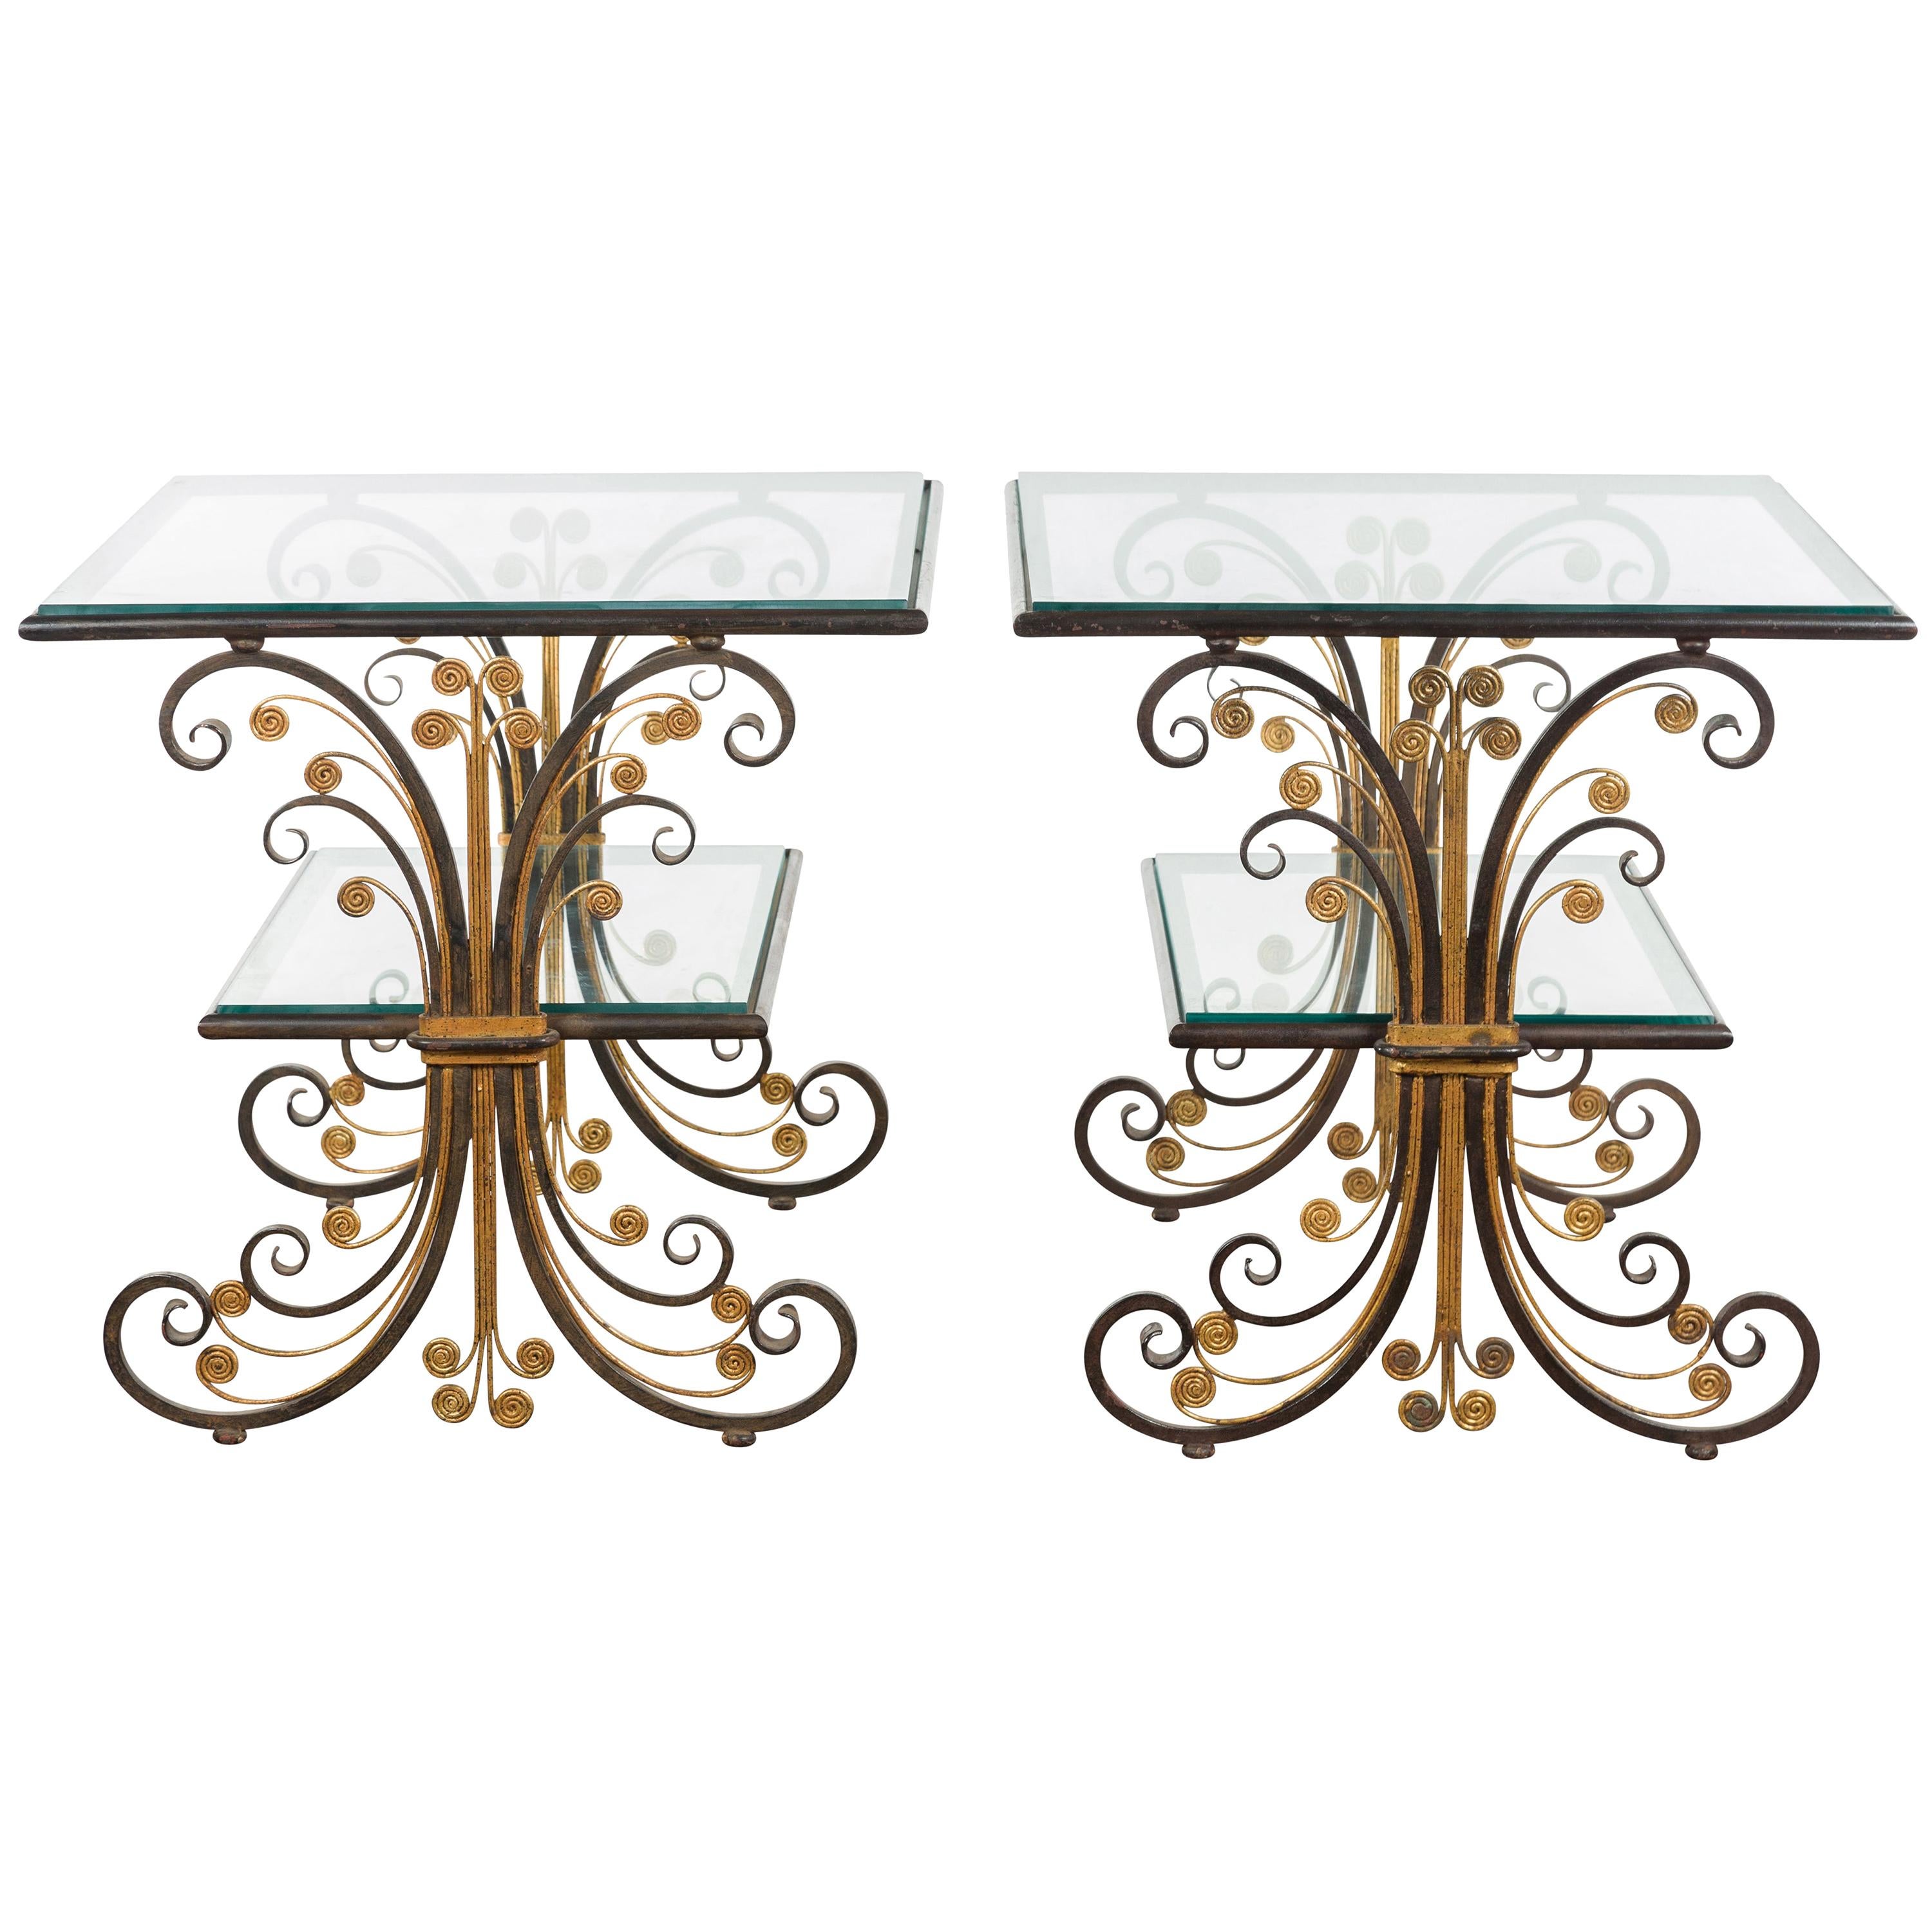 Pair of 1930s French Art Deco Period Iron and Brass Side Tables with Glass Tops